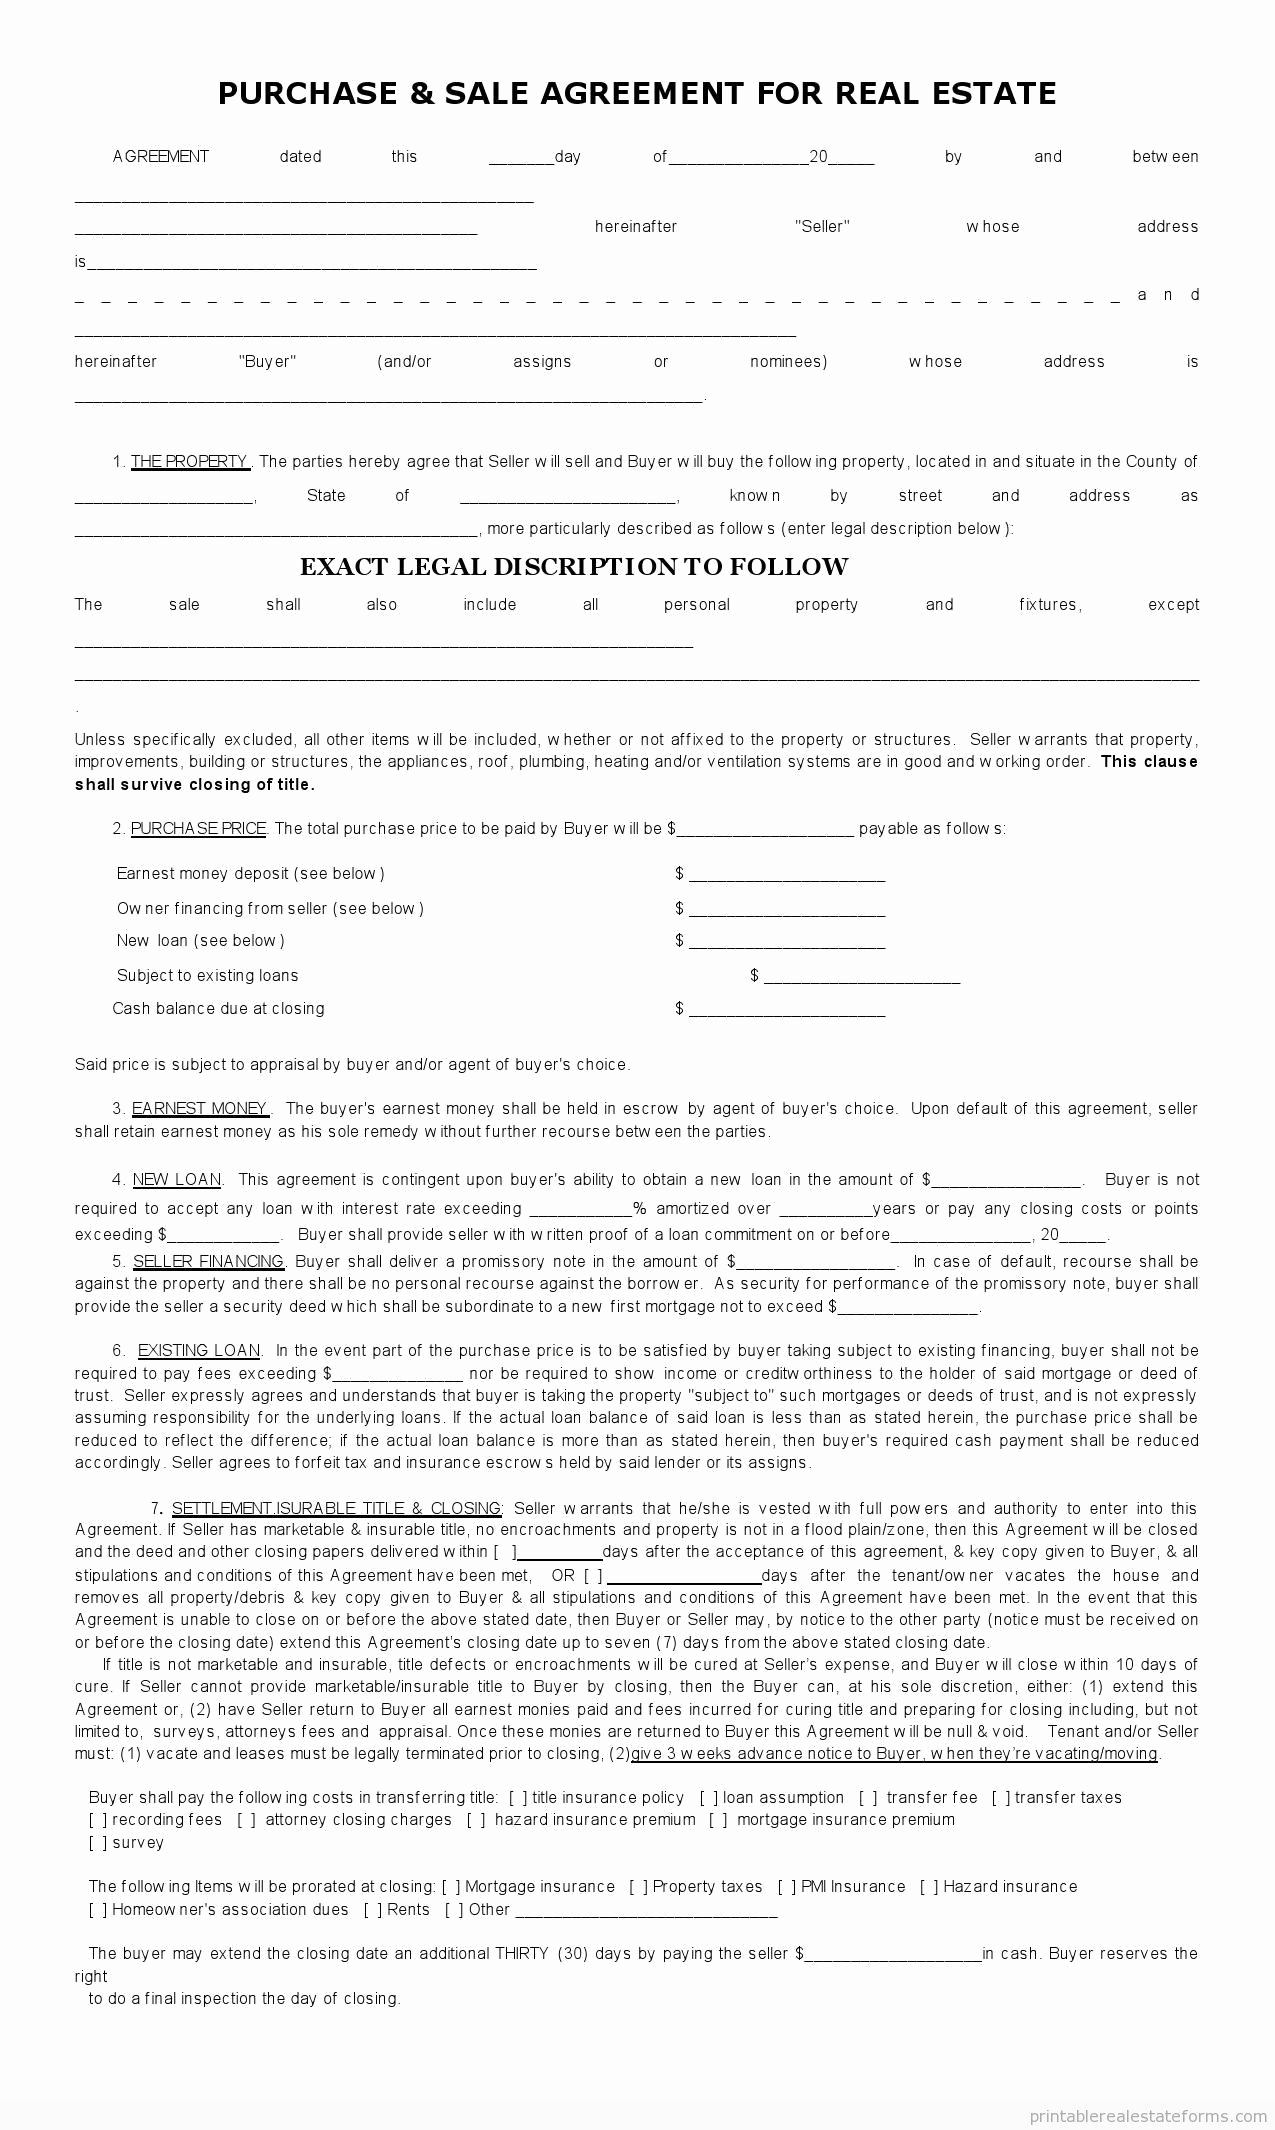 Real Estate Contract form Beautiful Sample Printable Sales Contract for Ing Subject 2 form